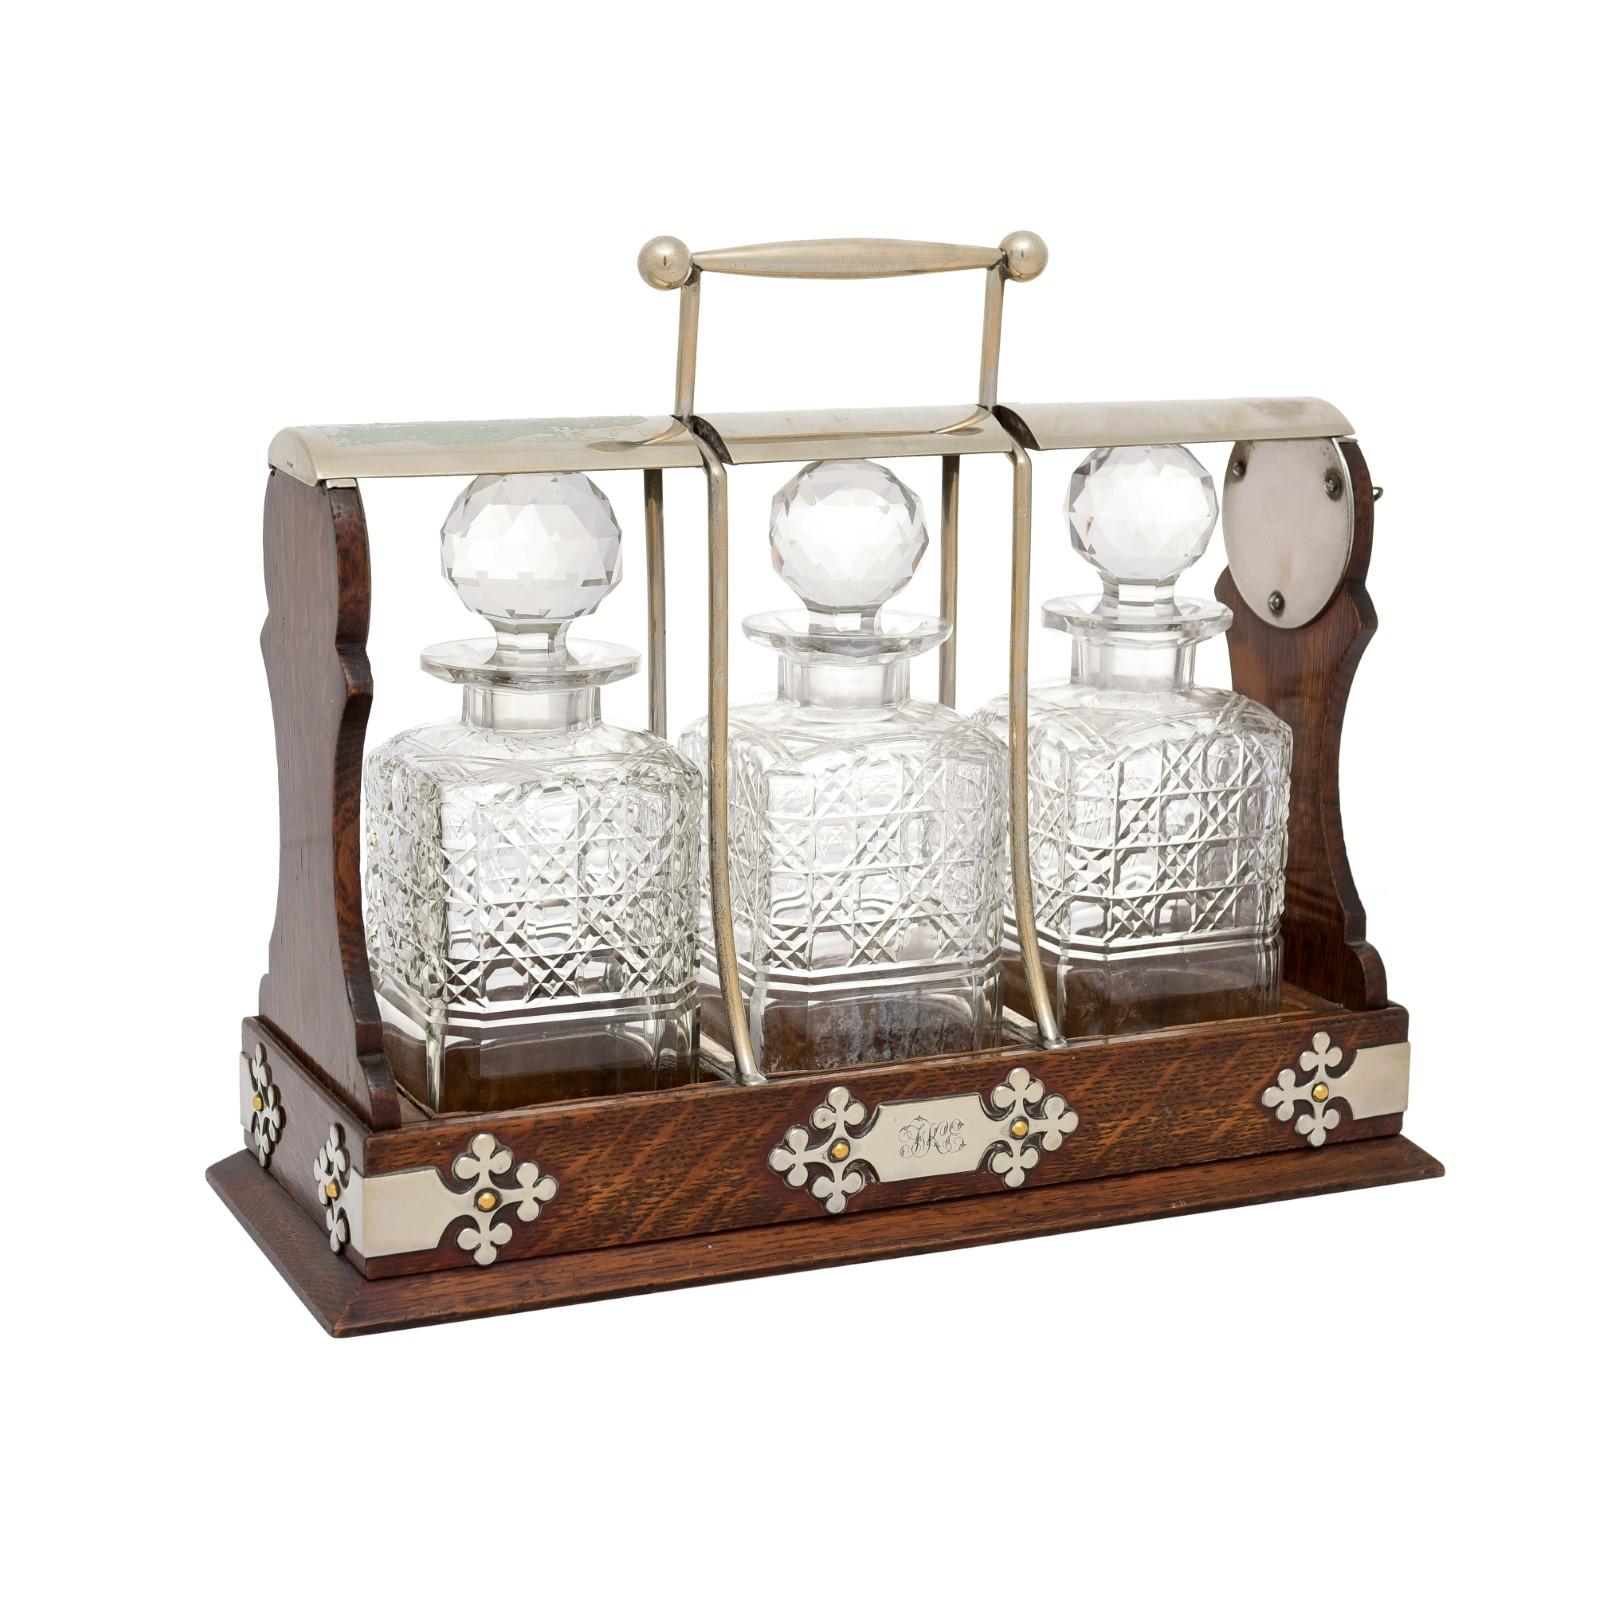 An English Victorian period wooden tantalus from the 19th century, with three cut glass decanters, key locking mechanism and silver metal accents. Created in England during the reign of Queen Victoria, this tantalus was designed to display the very